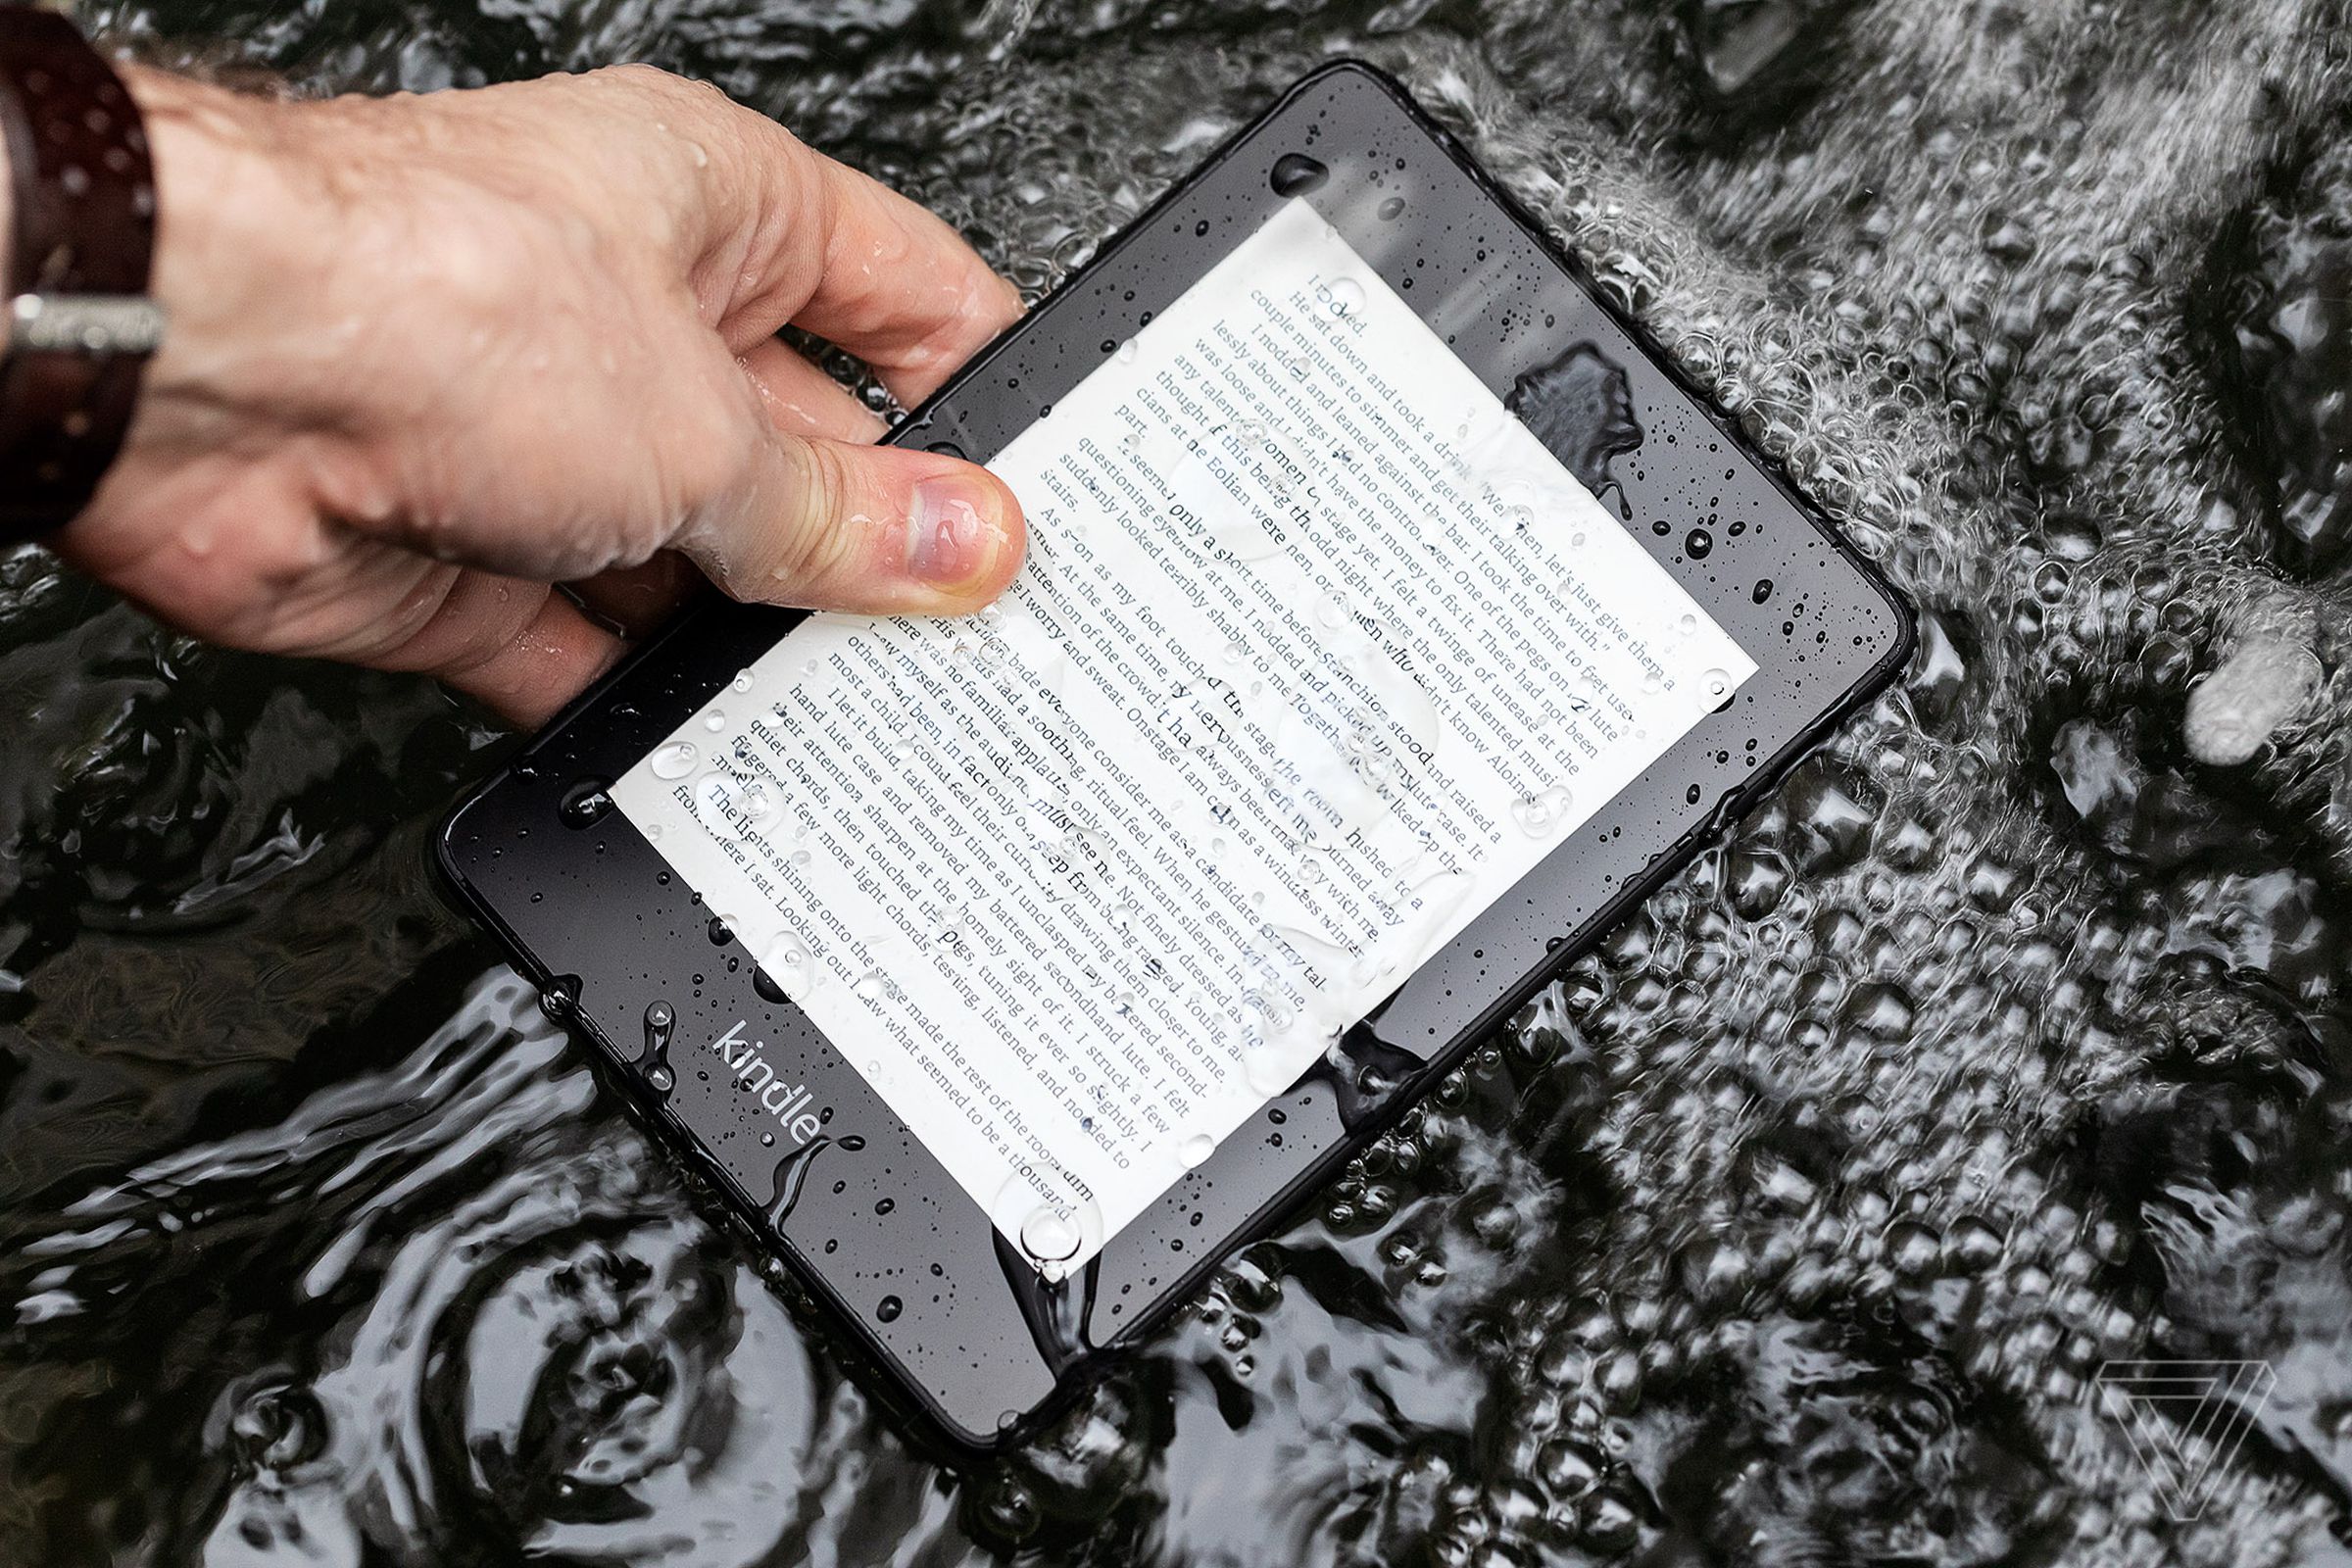 A hand holding a very wet Kindle Paperwhite as it lies on the ground.